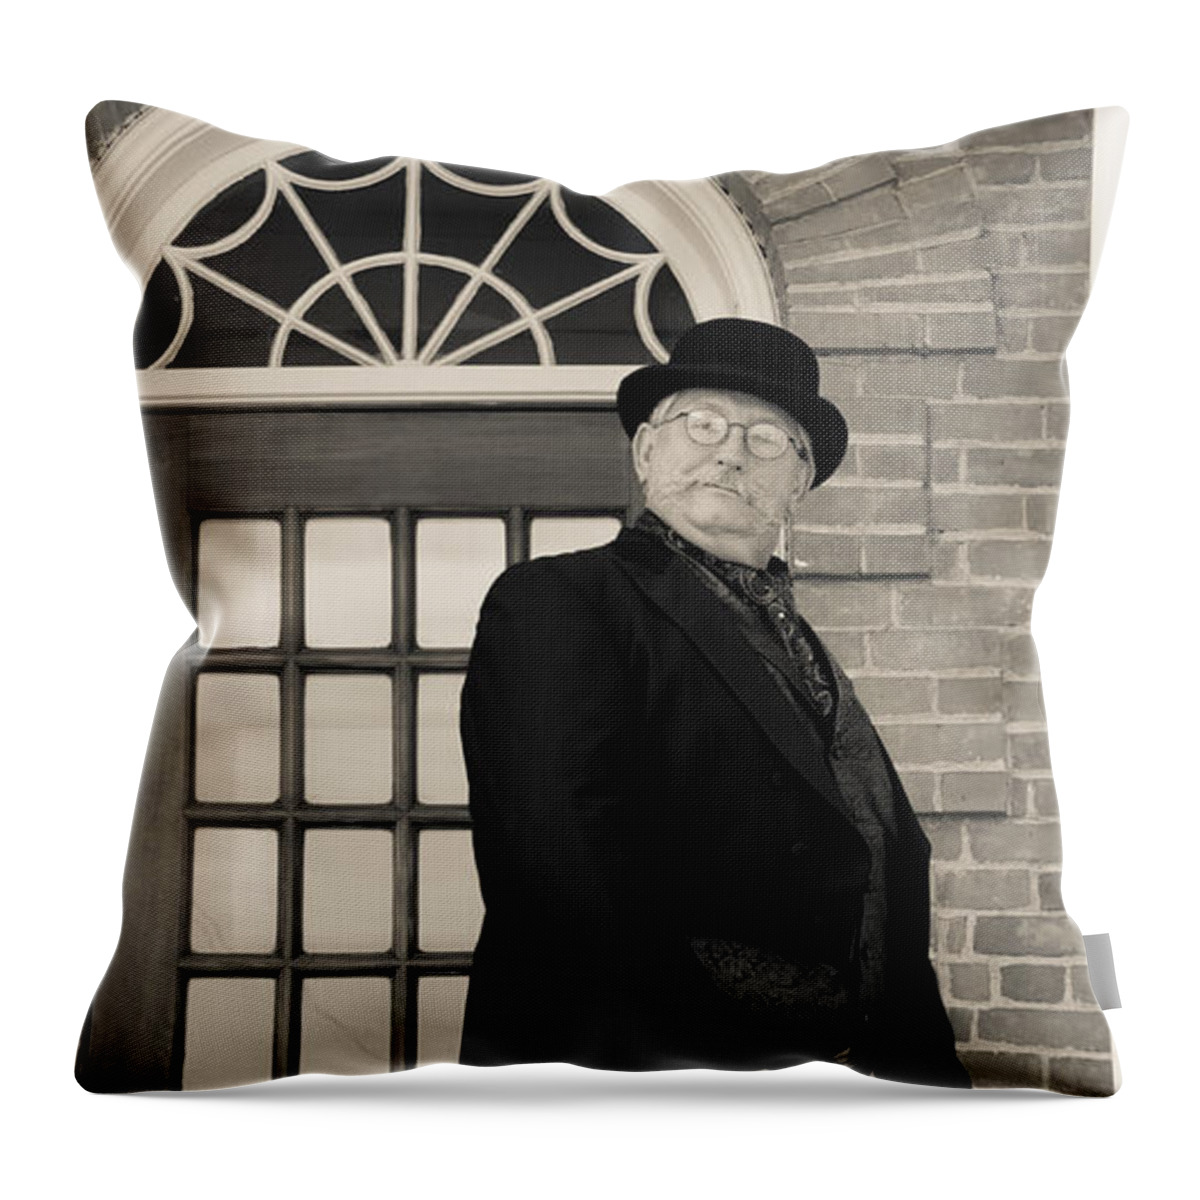 Dandy Throw Pillow featuring the photograph Victorian Dandy by Fran Riley